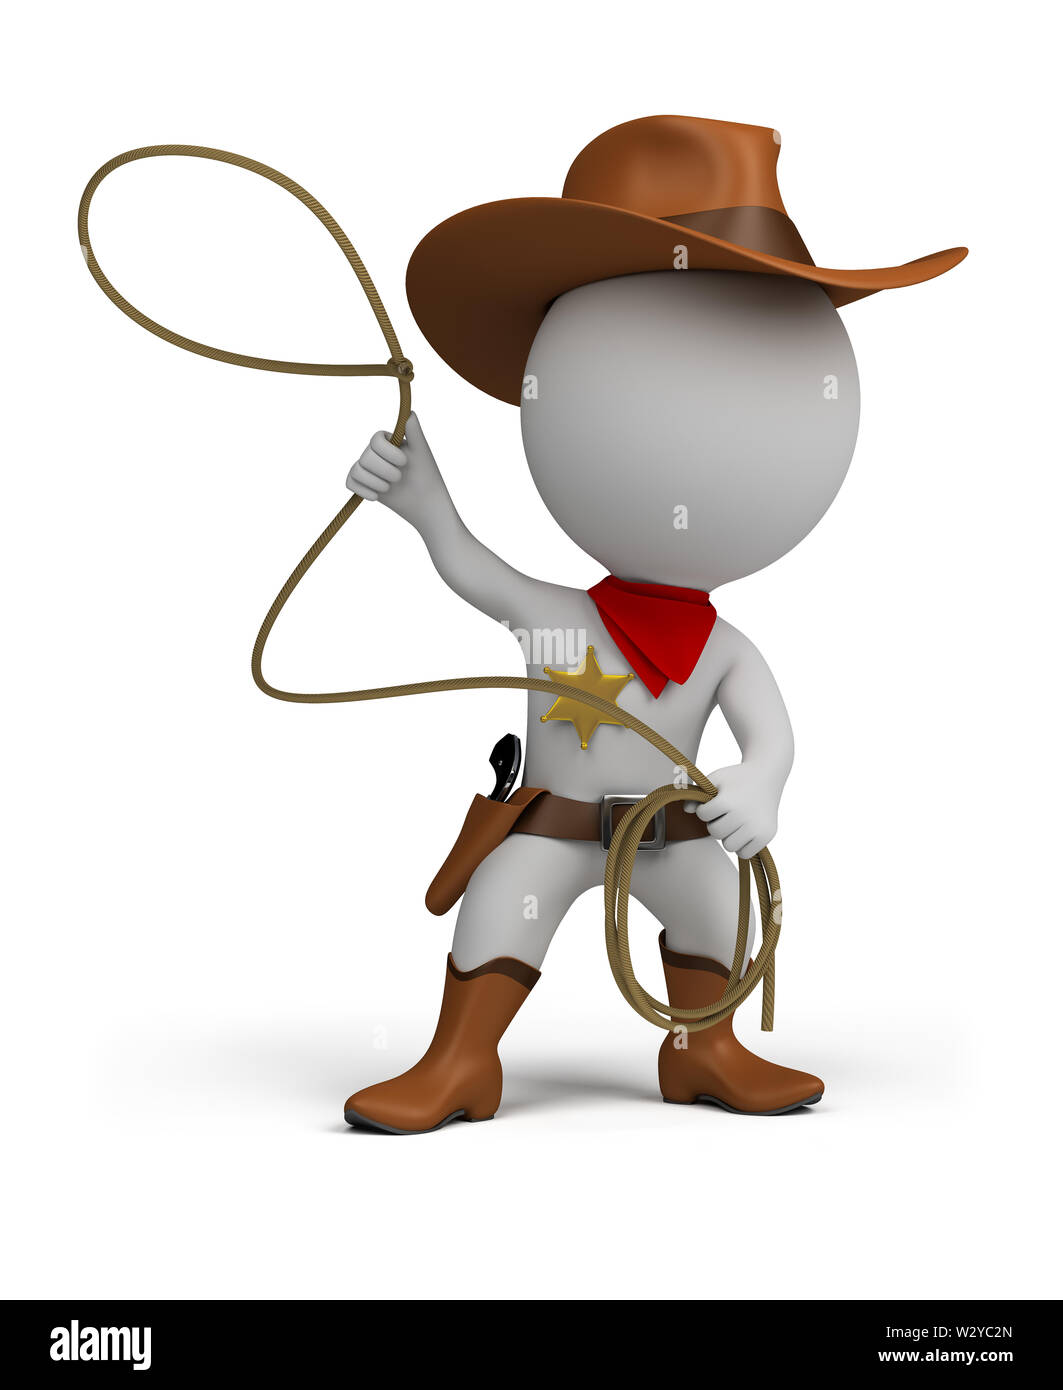 3d small person cowboy with lasso in hand, wearing a hat and boots. 3d image. Isolated white background. Stock Photo